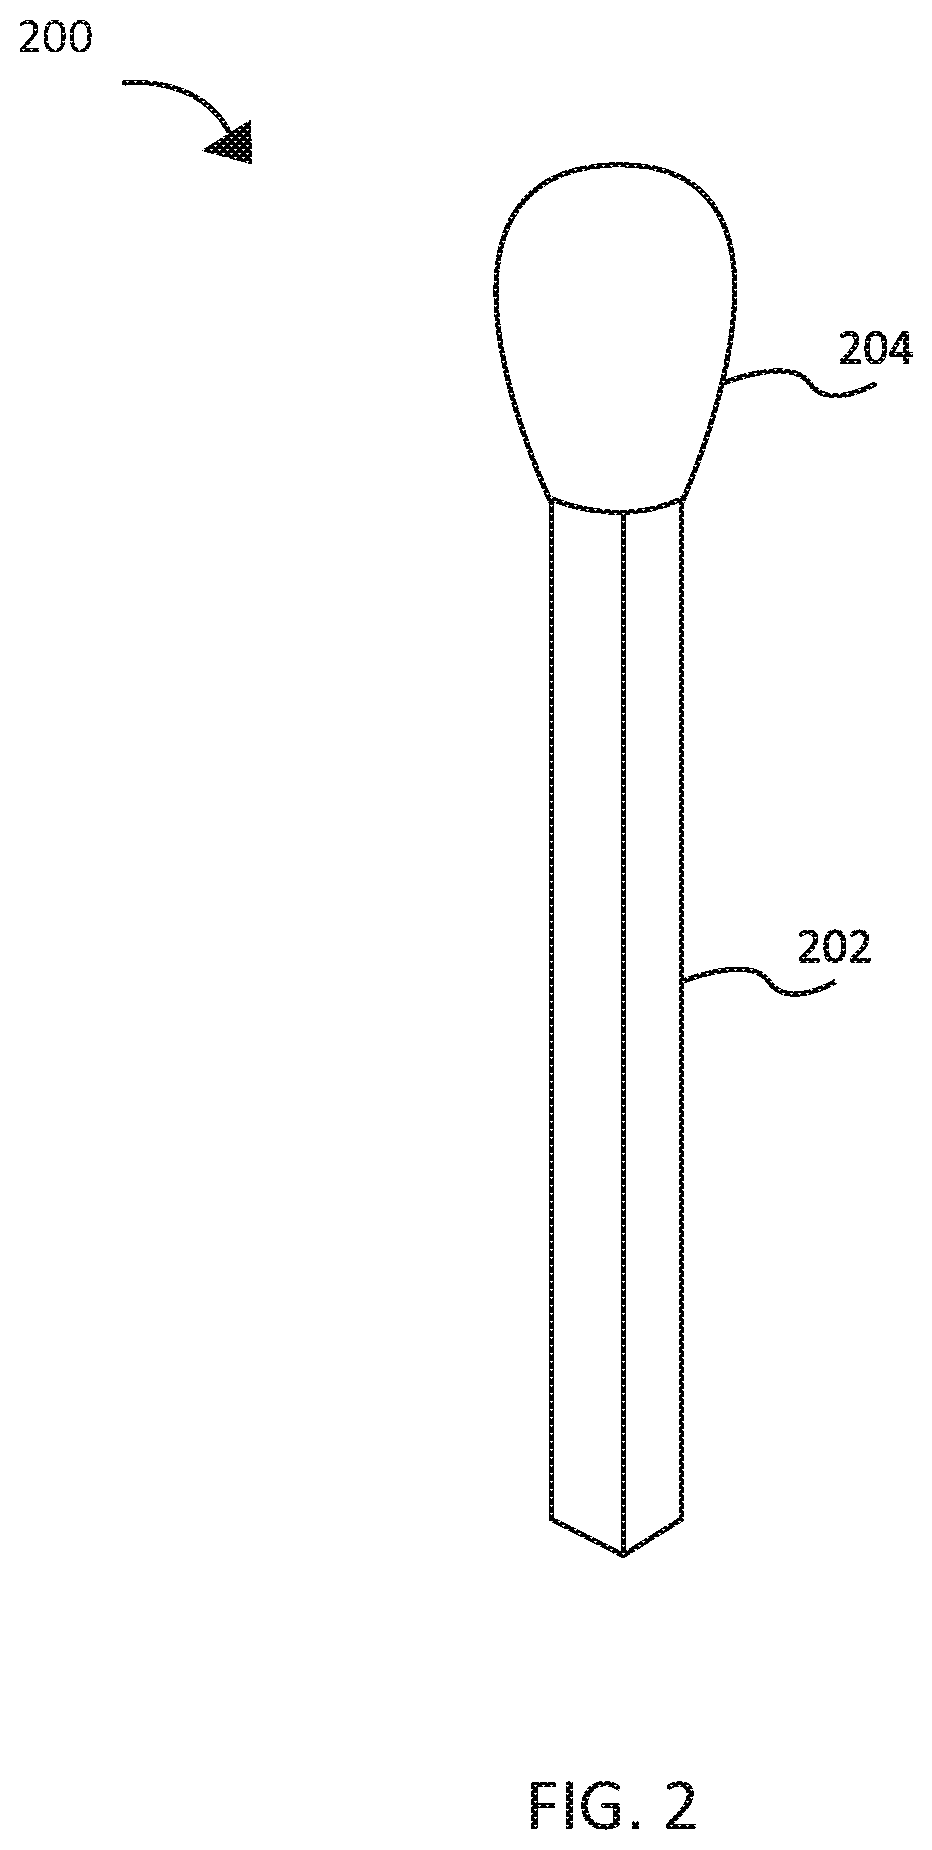 Self-lighting palo santo combustible article and method of manufacture thereof